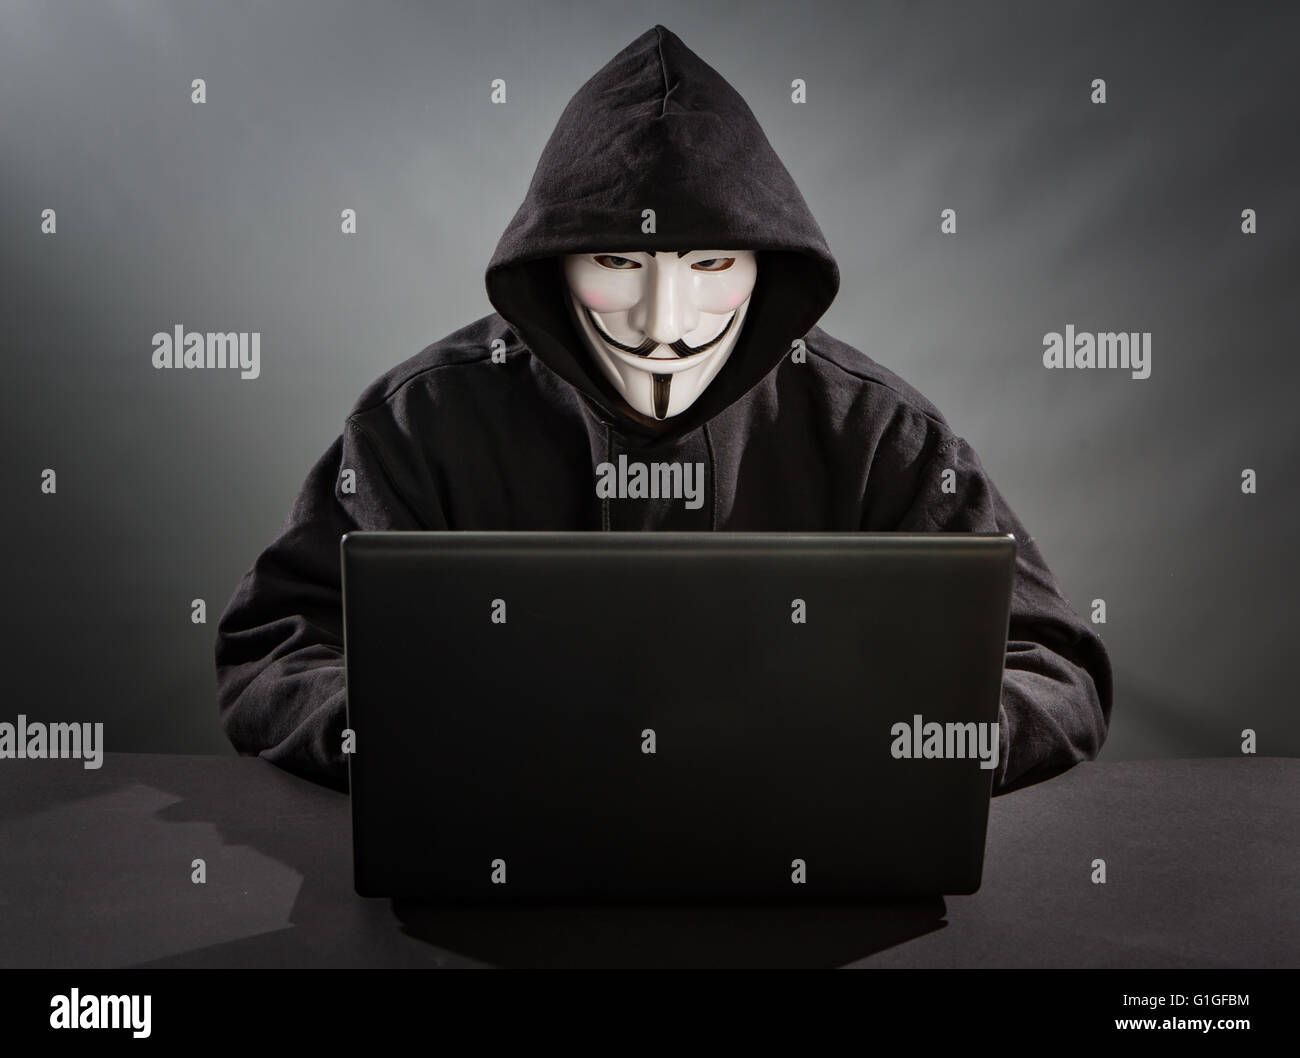 Bełchatow, Poland - December 18, 2015: Man with the laptop wearing Vendetta mask - symbol for the online hacktivist group Anonym Stock Photo